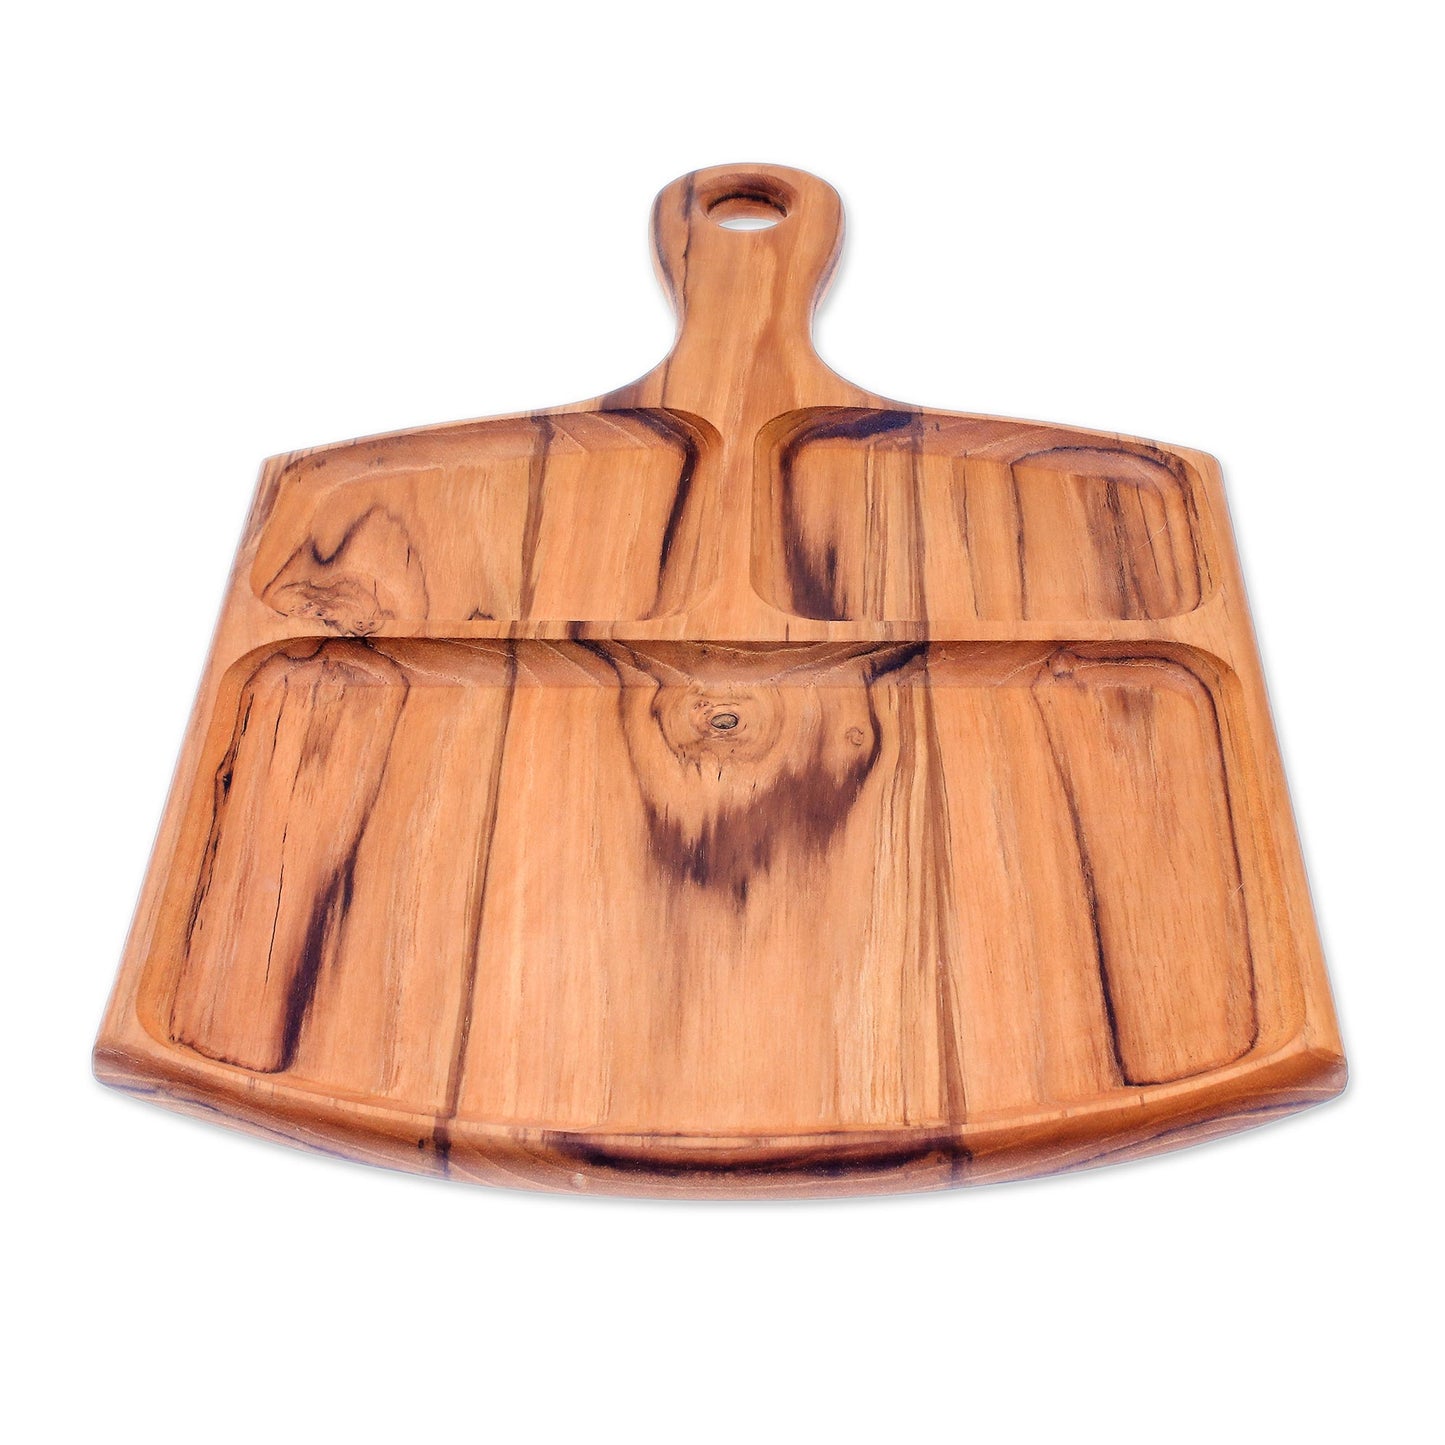 Delightful Portion Sectioned Teak Wood Tray Crafted in Thailand